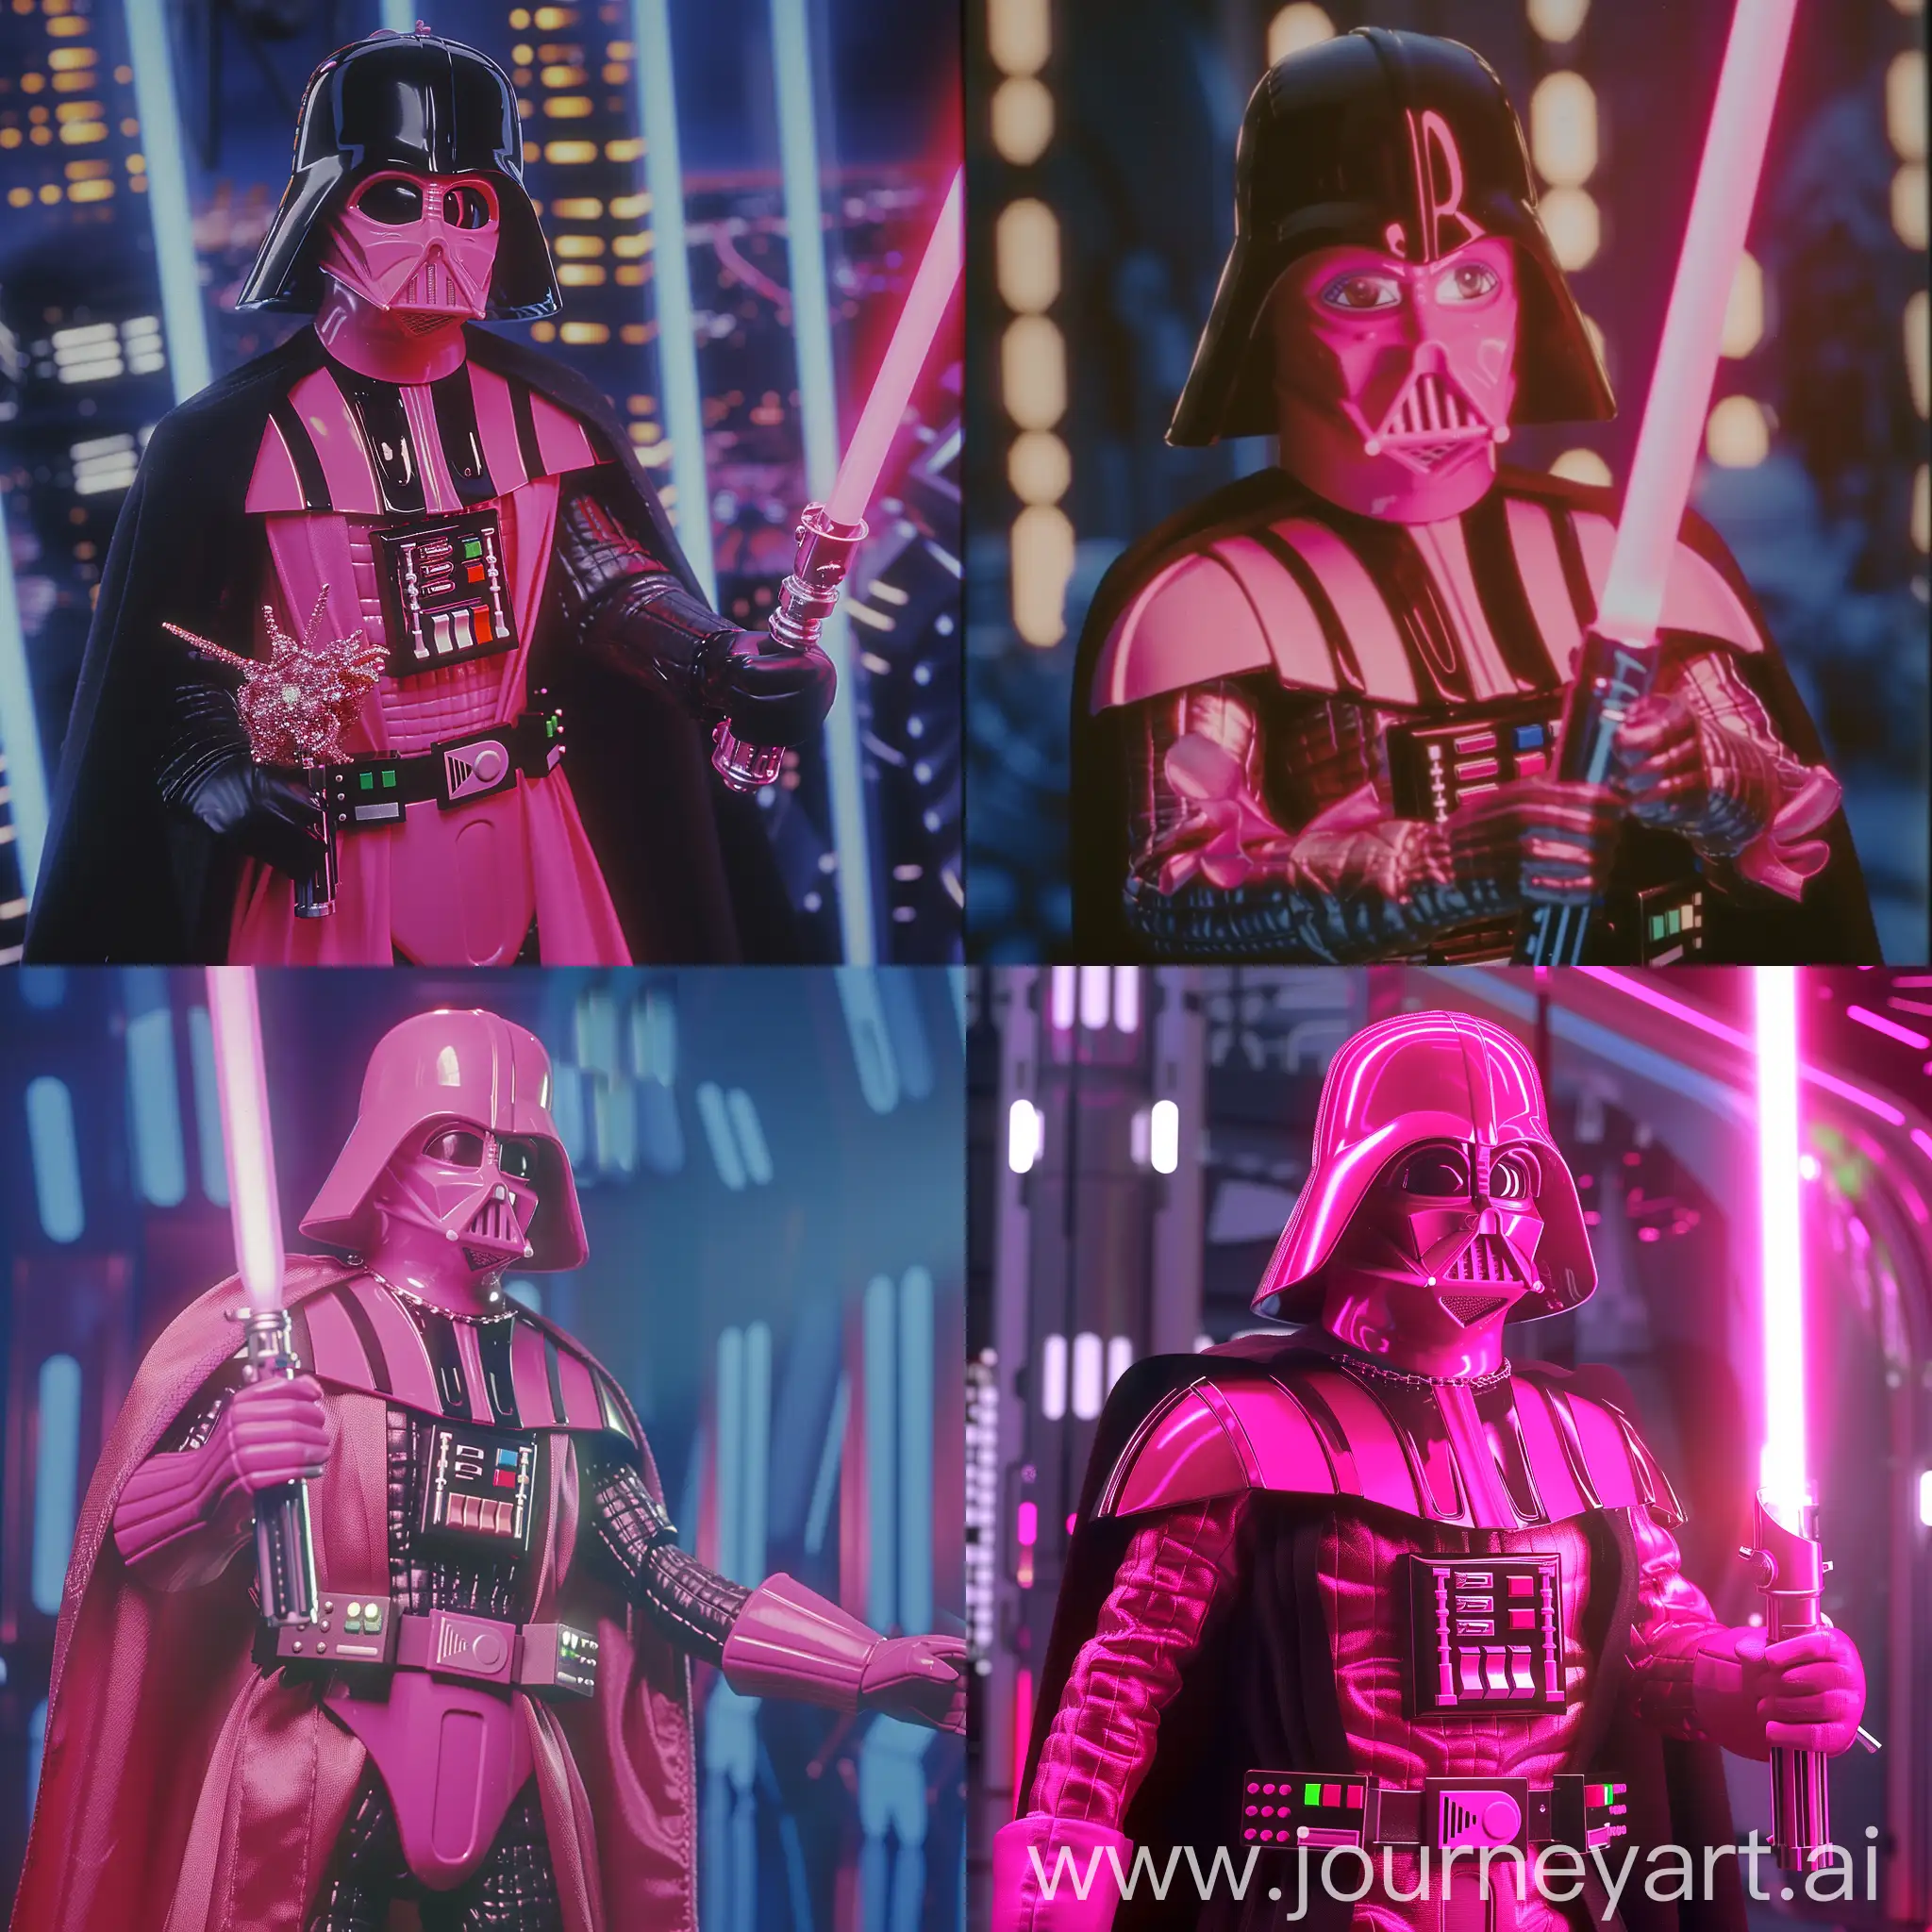 Darth Vader  in anime genre film, dvd screenshot from anime film, barbie Vader wearing barbie (pink and romantic) costume, holding pink lightsaber and 80s anime film composition